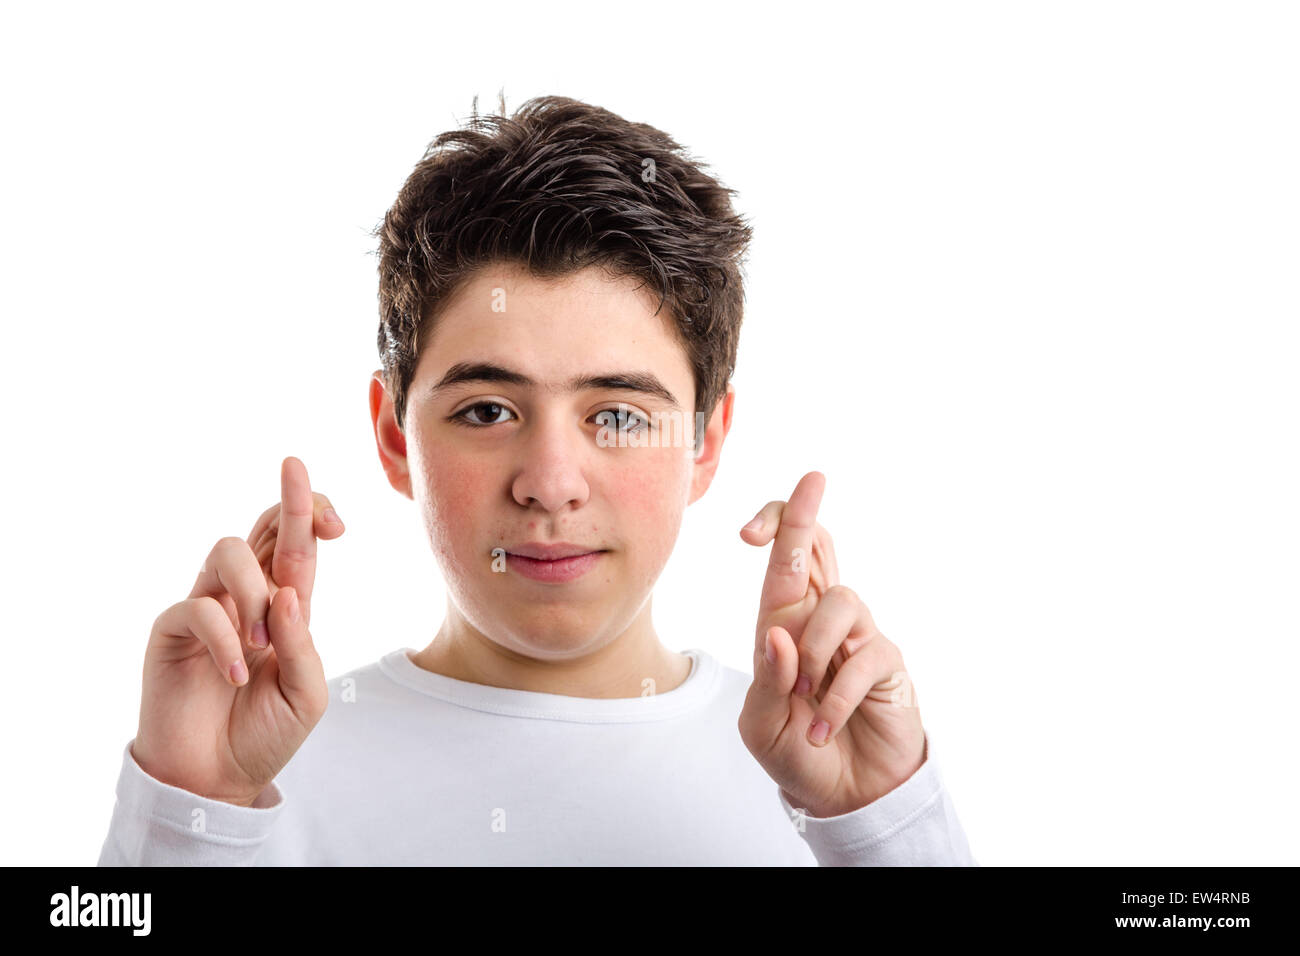 Latin young boy with acne in a white long sleeve t-shirt smiles crossing fingers of both hands as superstitious gesture to get luck Stock Photo